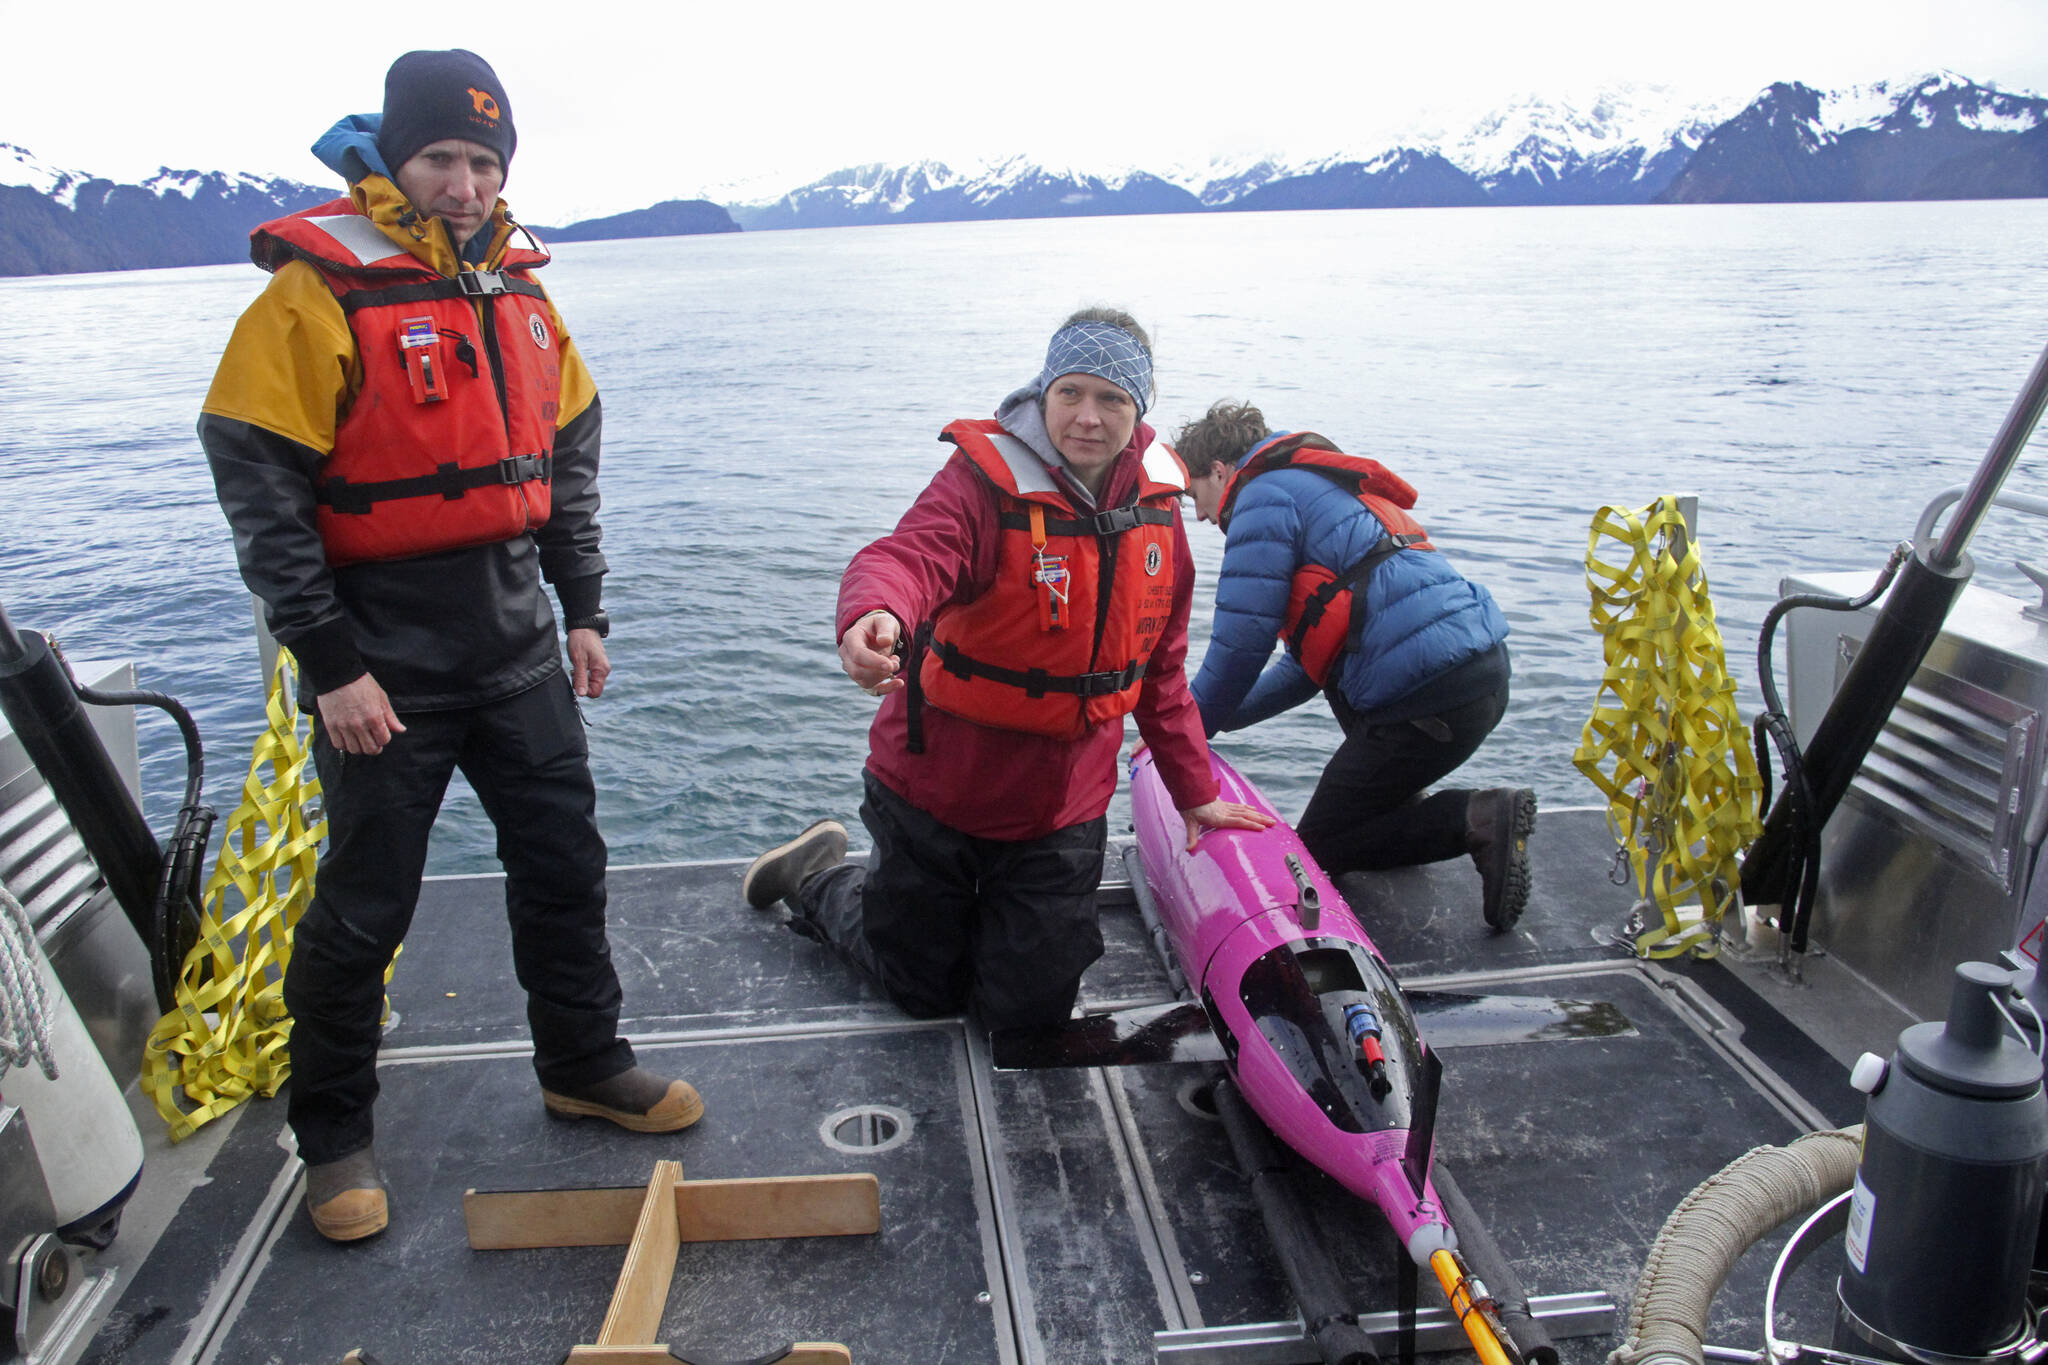 This May 4, 2022, photo shows oceanographers Andrew McDonnell, left, and Claudine Hauri, middle, along with engineer Joran Kemme after an underwater glider was pulled aboard the University of Alaska Fairbanks research vessel Nanuq from the Gulf of Alaska. The glider was fitted with special sensors to study ocean acidification. (AP Photo/Mark Thiessen)